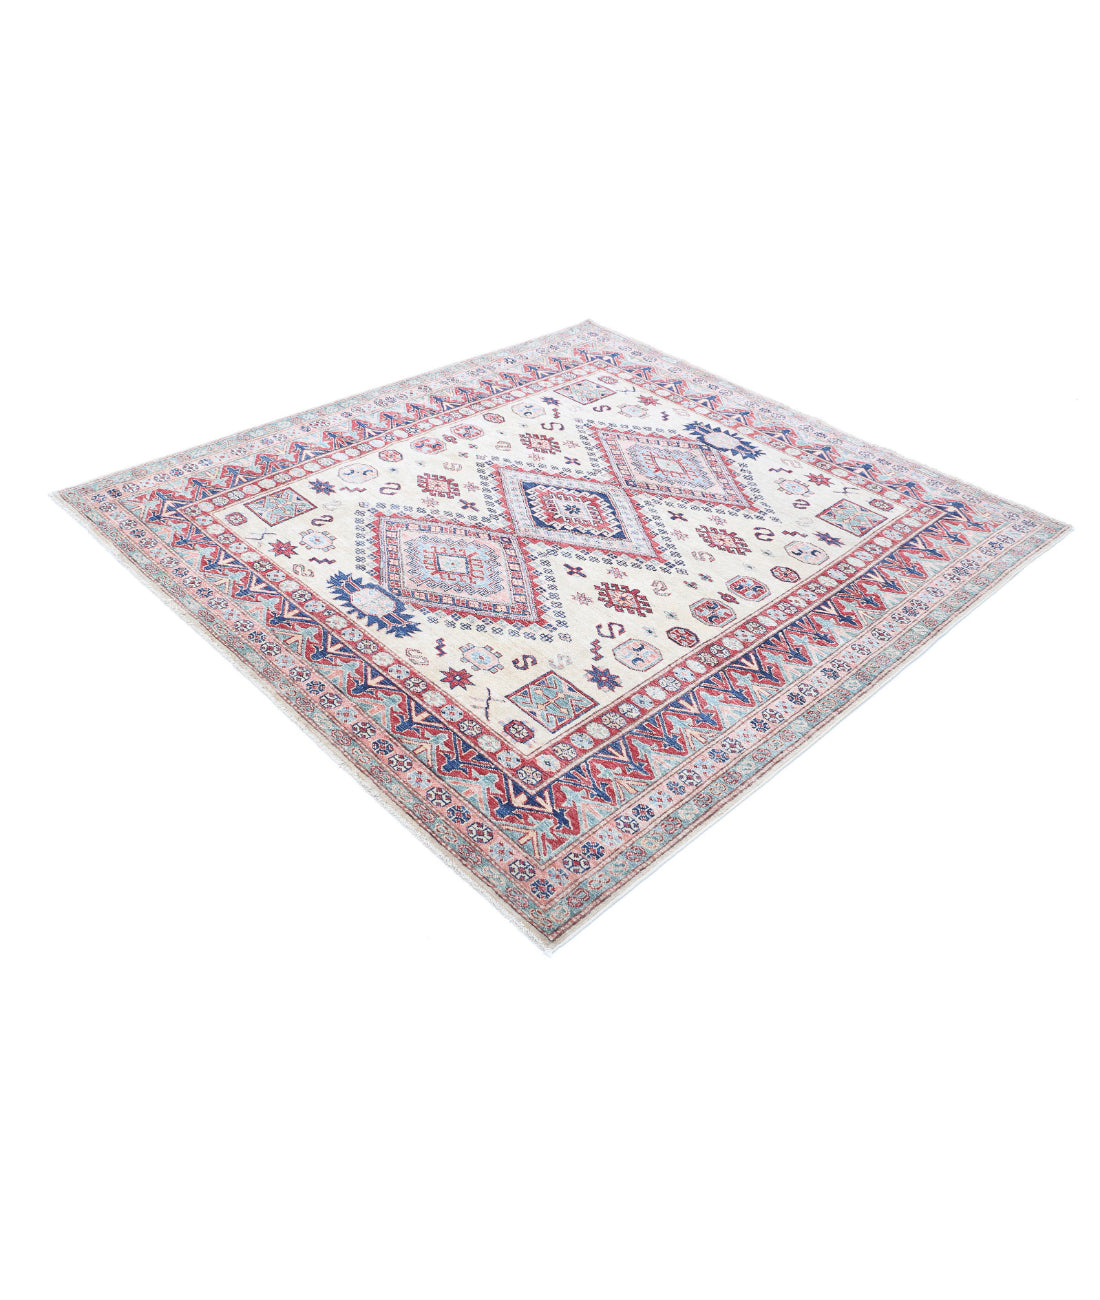 Hand Knotted Royal Kazak Wool Rug - 6'1'' x 6'6'' 6'1'' x 6'6'' (183 X 195) / Ivory / Red